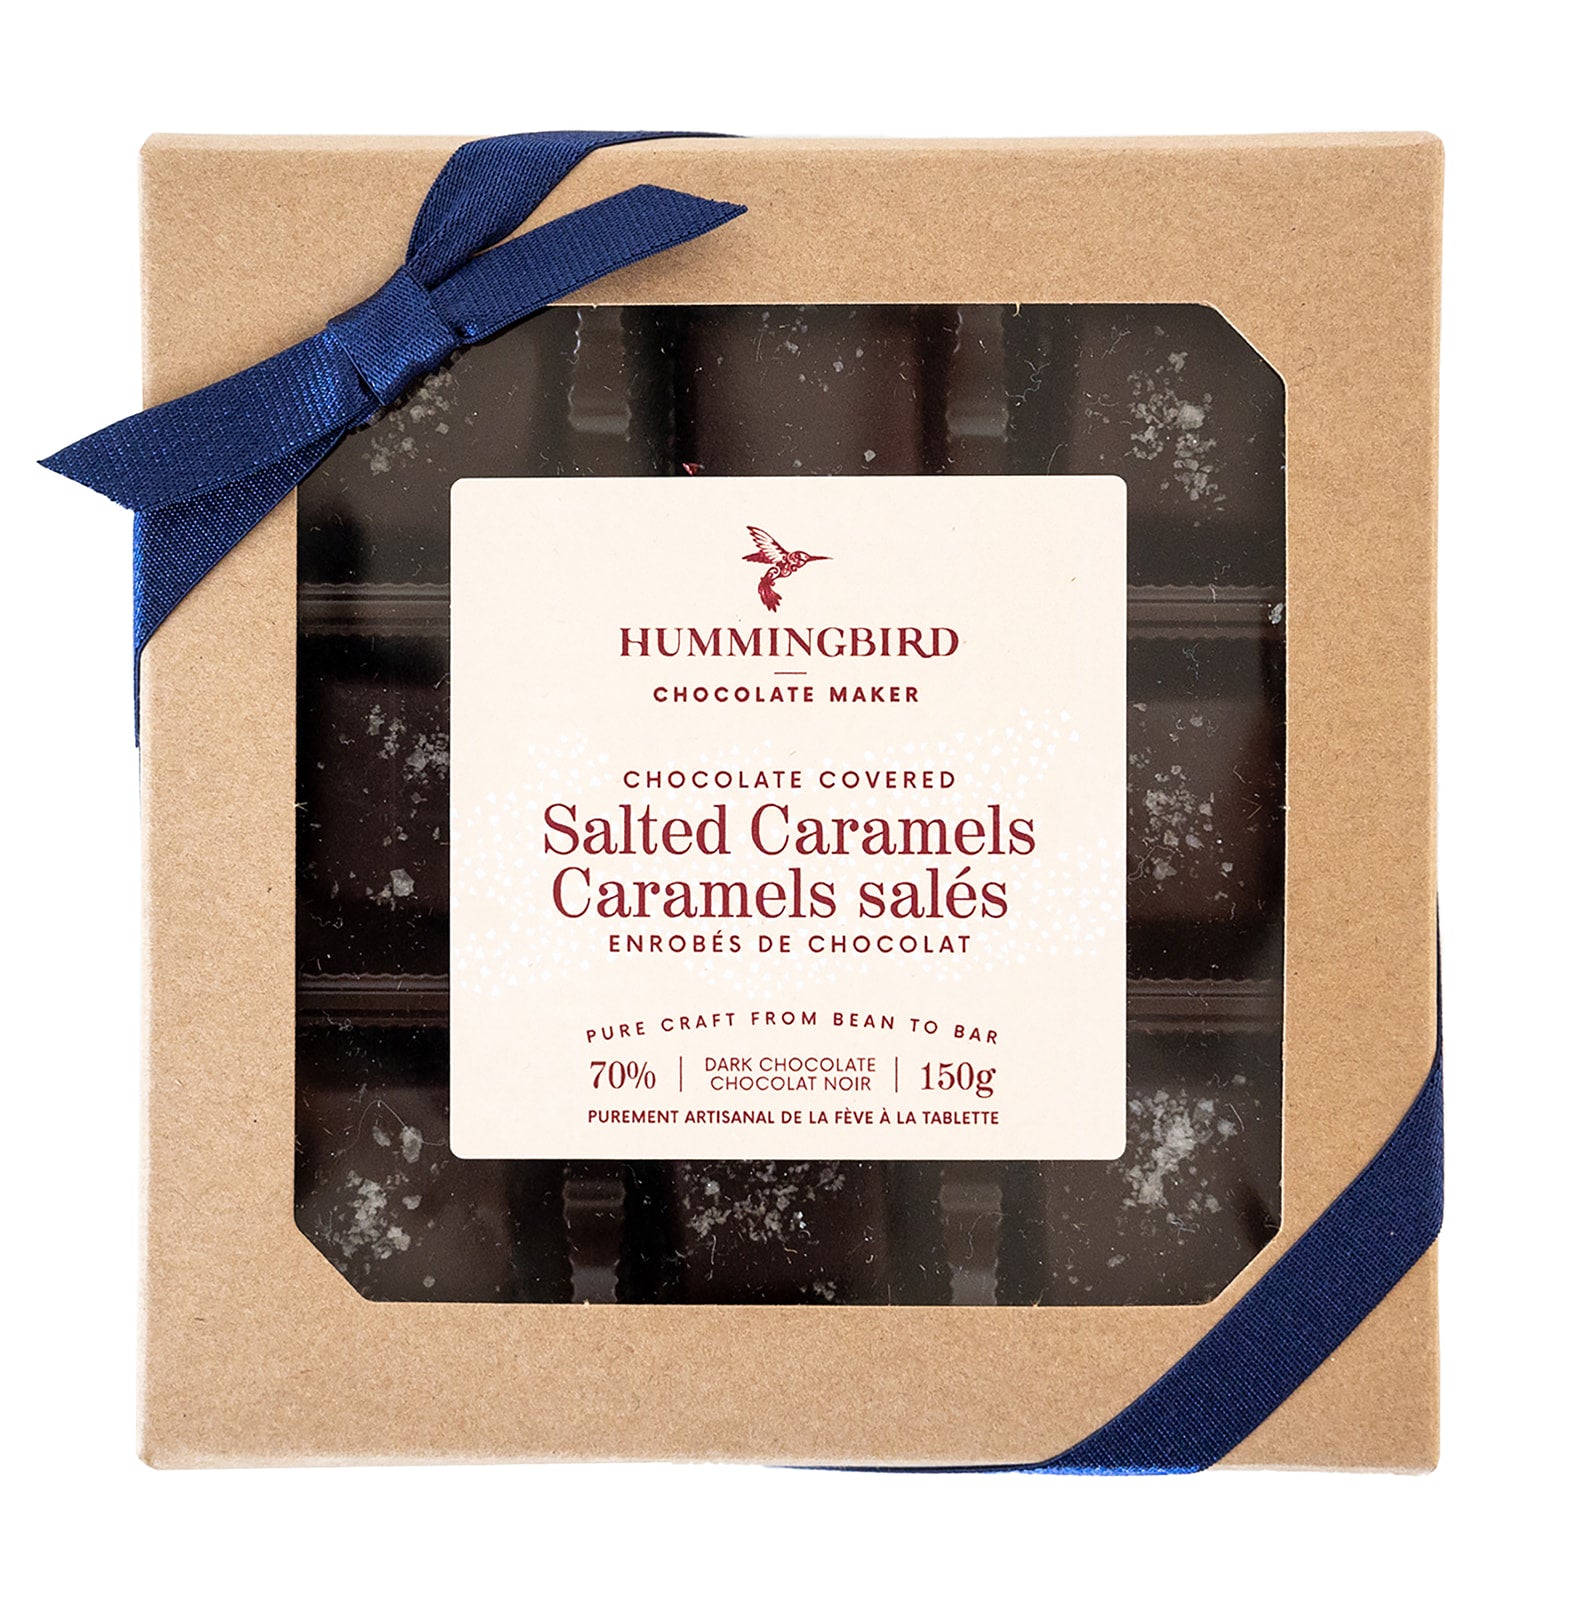 Hummingbird Chocolate Salted Caramels. Handcrafted buttery caramel enrobed in our bean-to-bar 70% dark chocolate topped with Canadian sea salt.